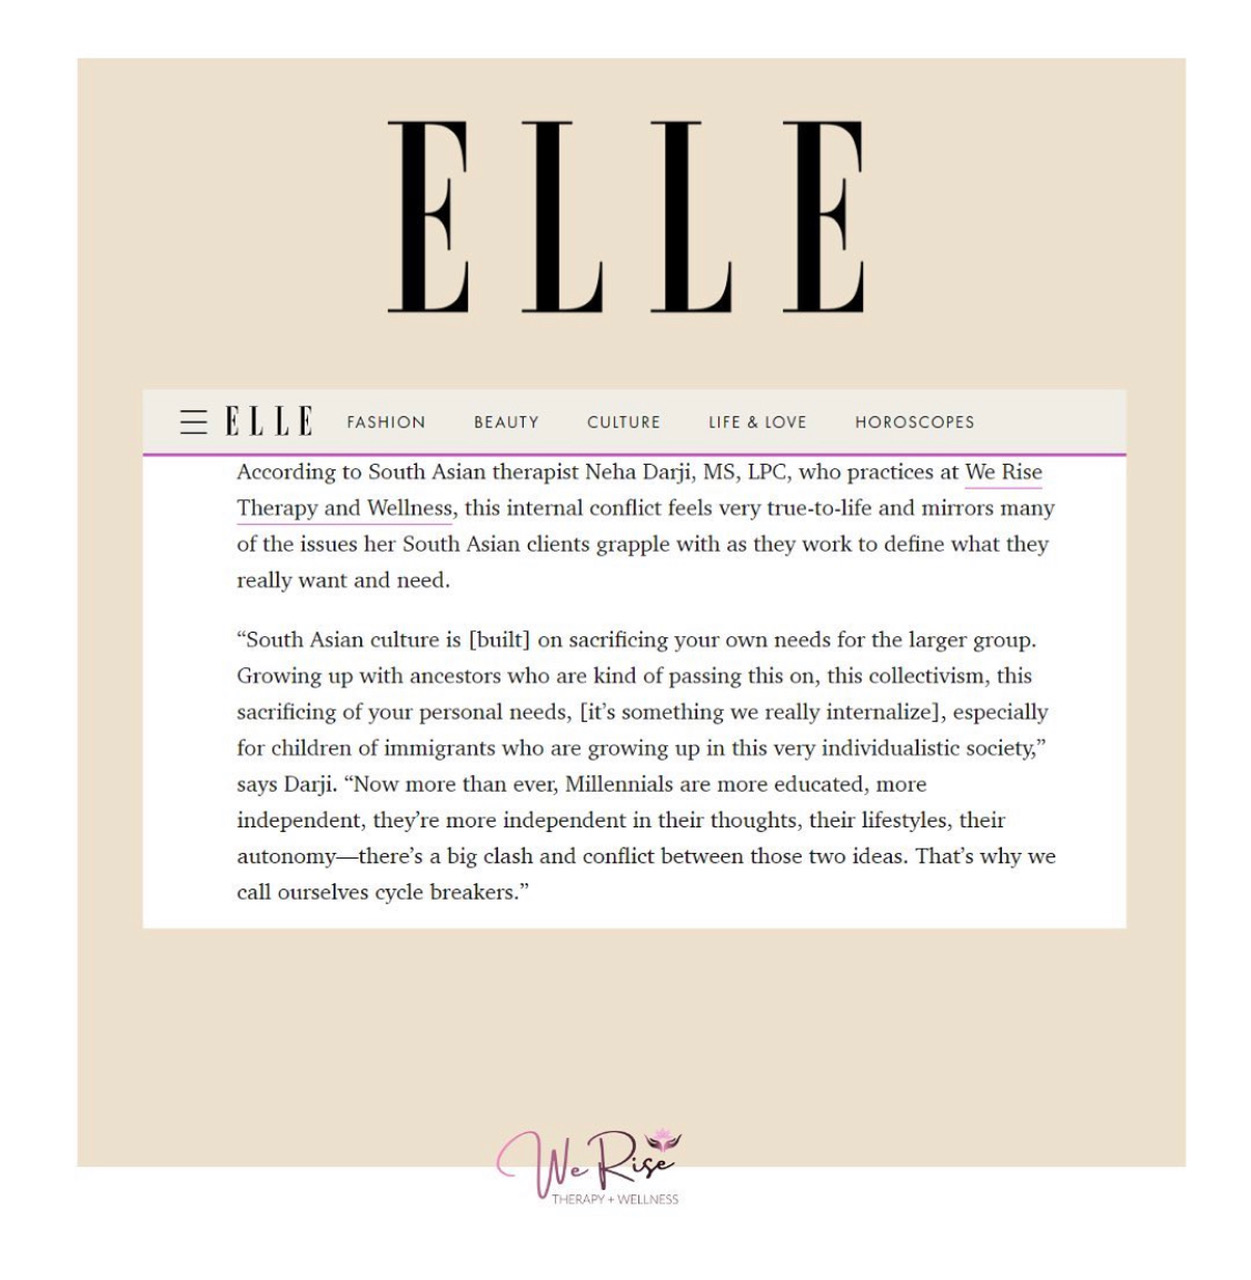 We Rise Therapy and Wellness was featured in ELLE providing feedback as a therapist in regards to South Asian Women in TV recently choosing themselves.